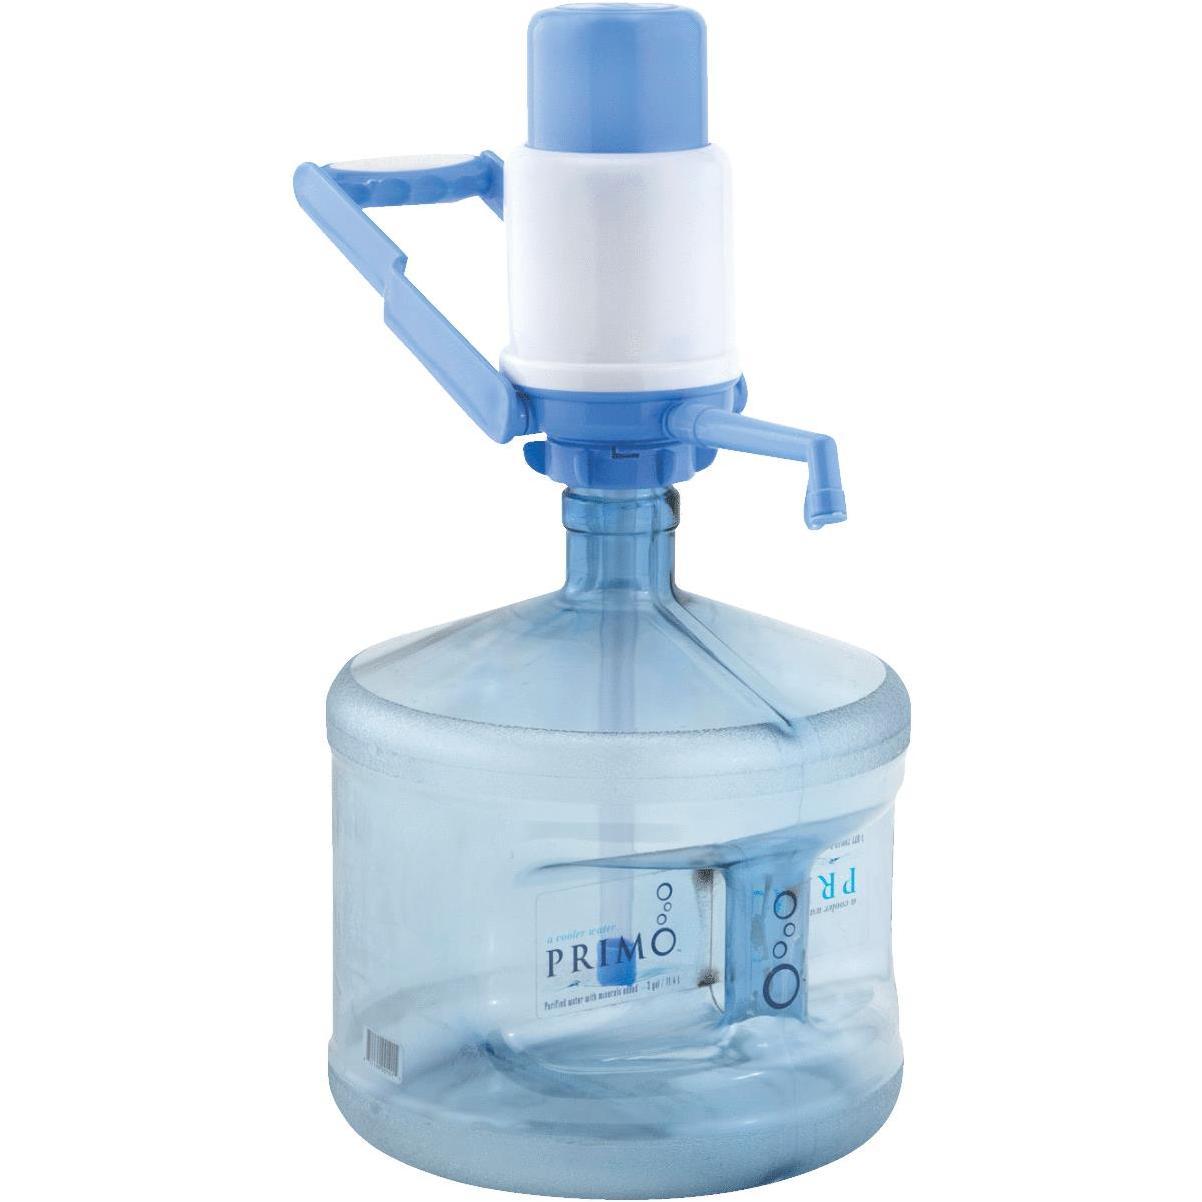 Manual Water Pump With Handle In Pakistan